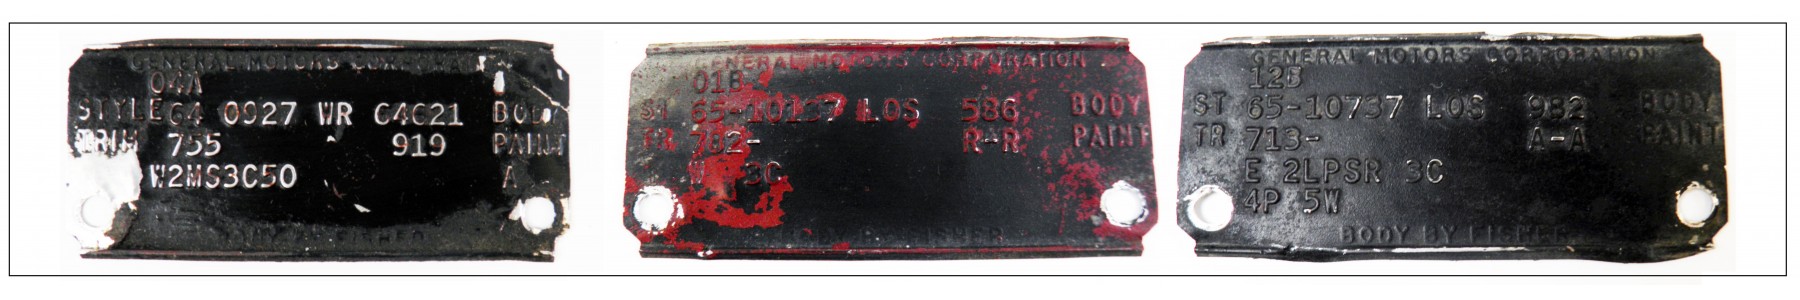 USED 1966 BODY TAGS